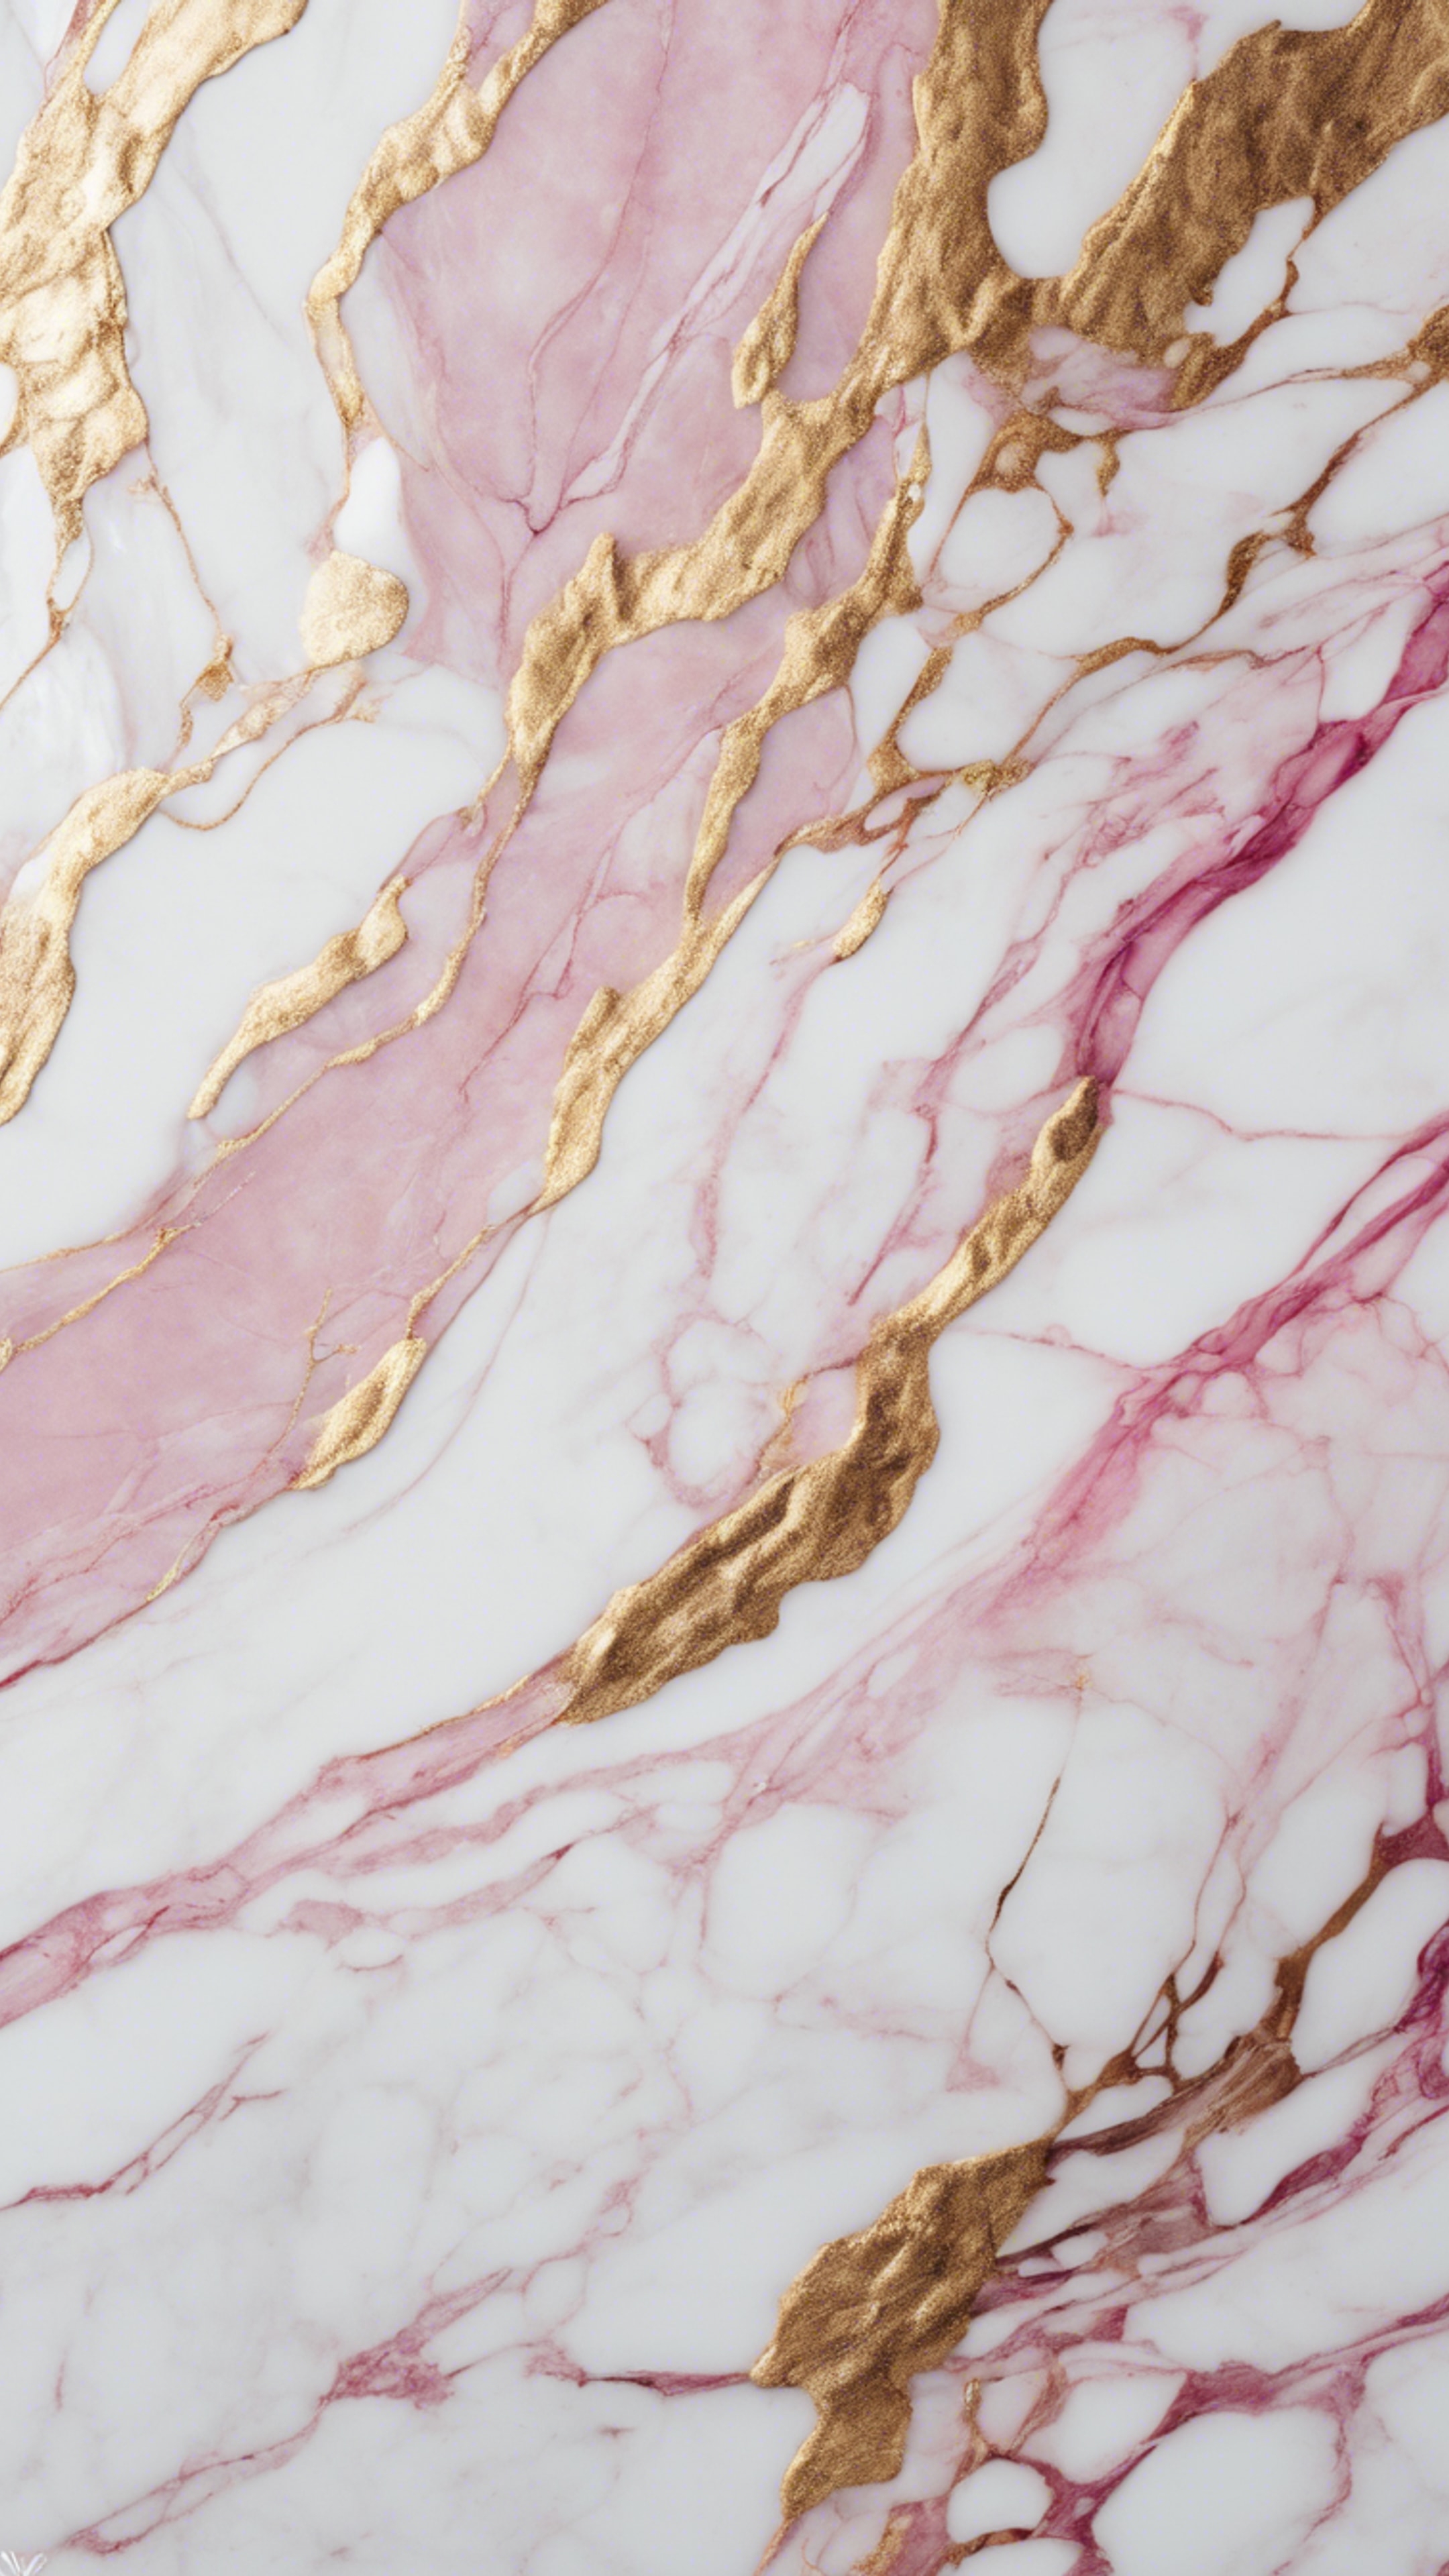 A close-up view of a white marble texture with subtle pink and gold streaks Kertas dinding[94d0ed0dfacd4436a1ca]